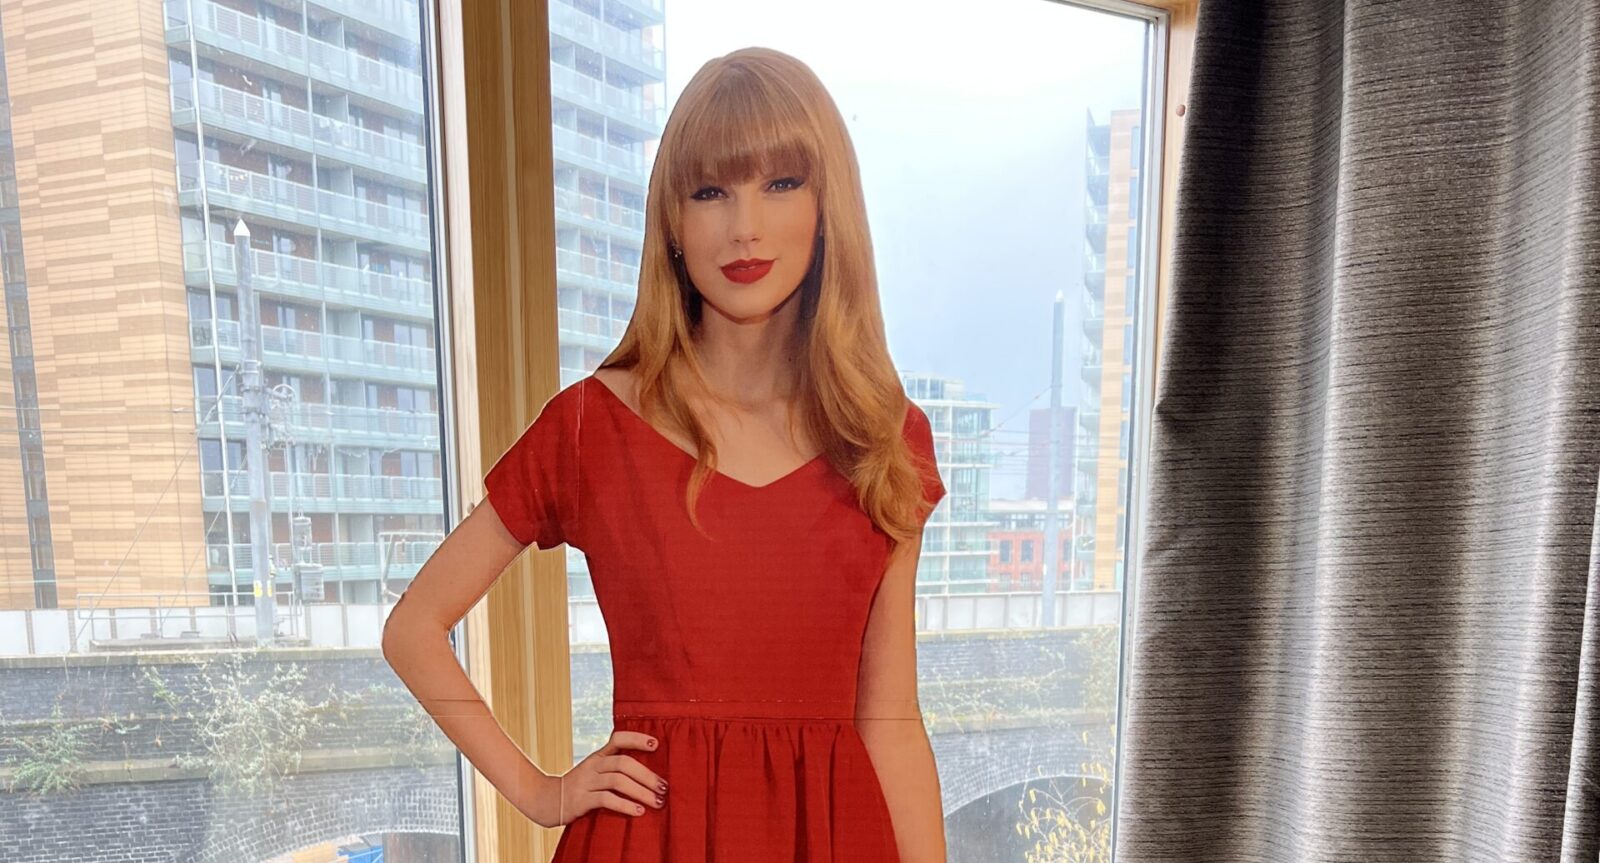 Manchester's iconic 'Tram Taylor' Swift cardboard cut-out is being